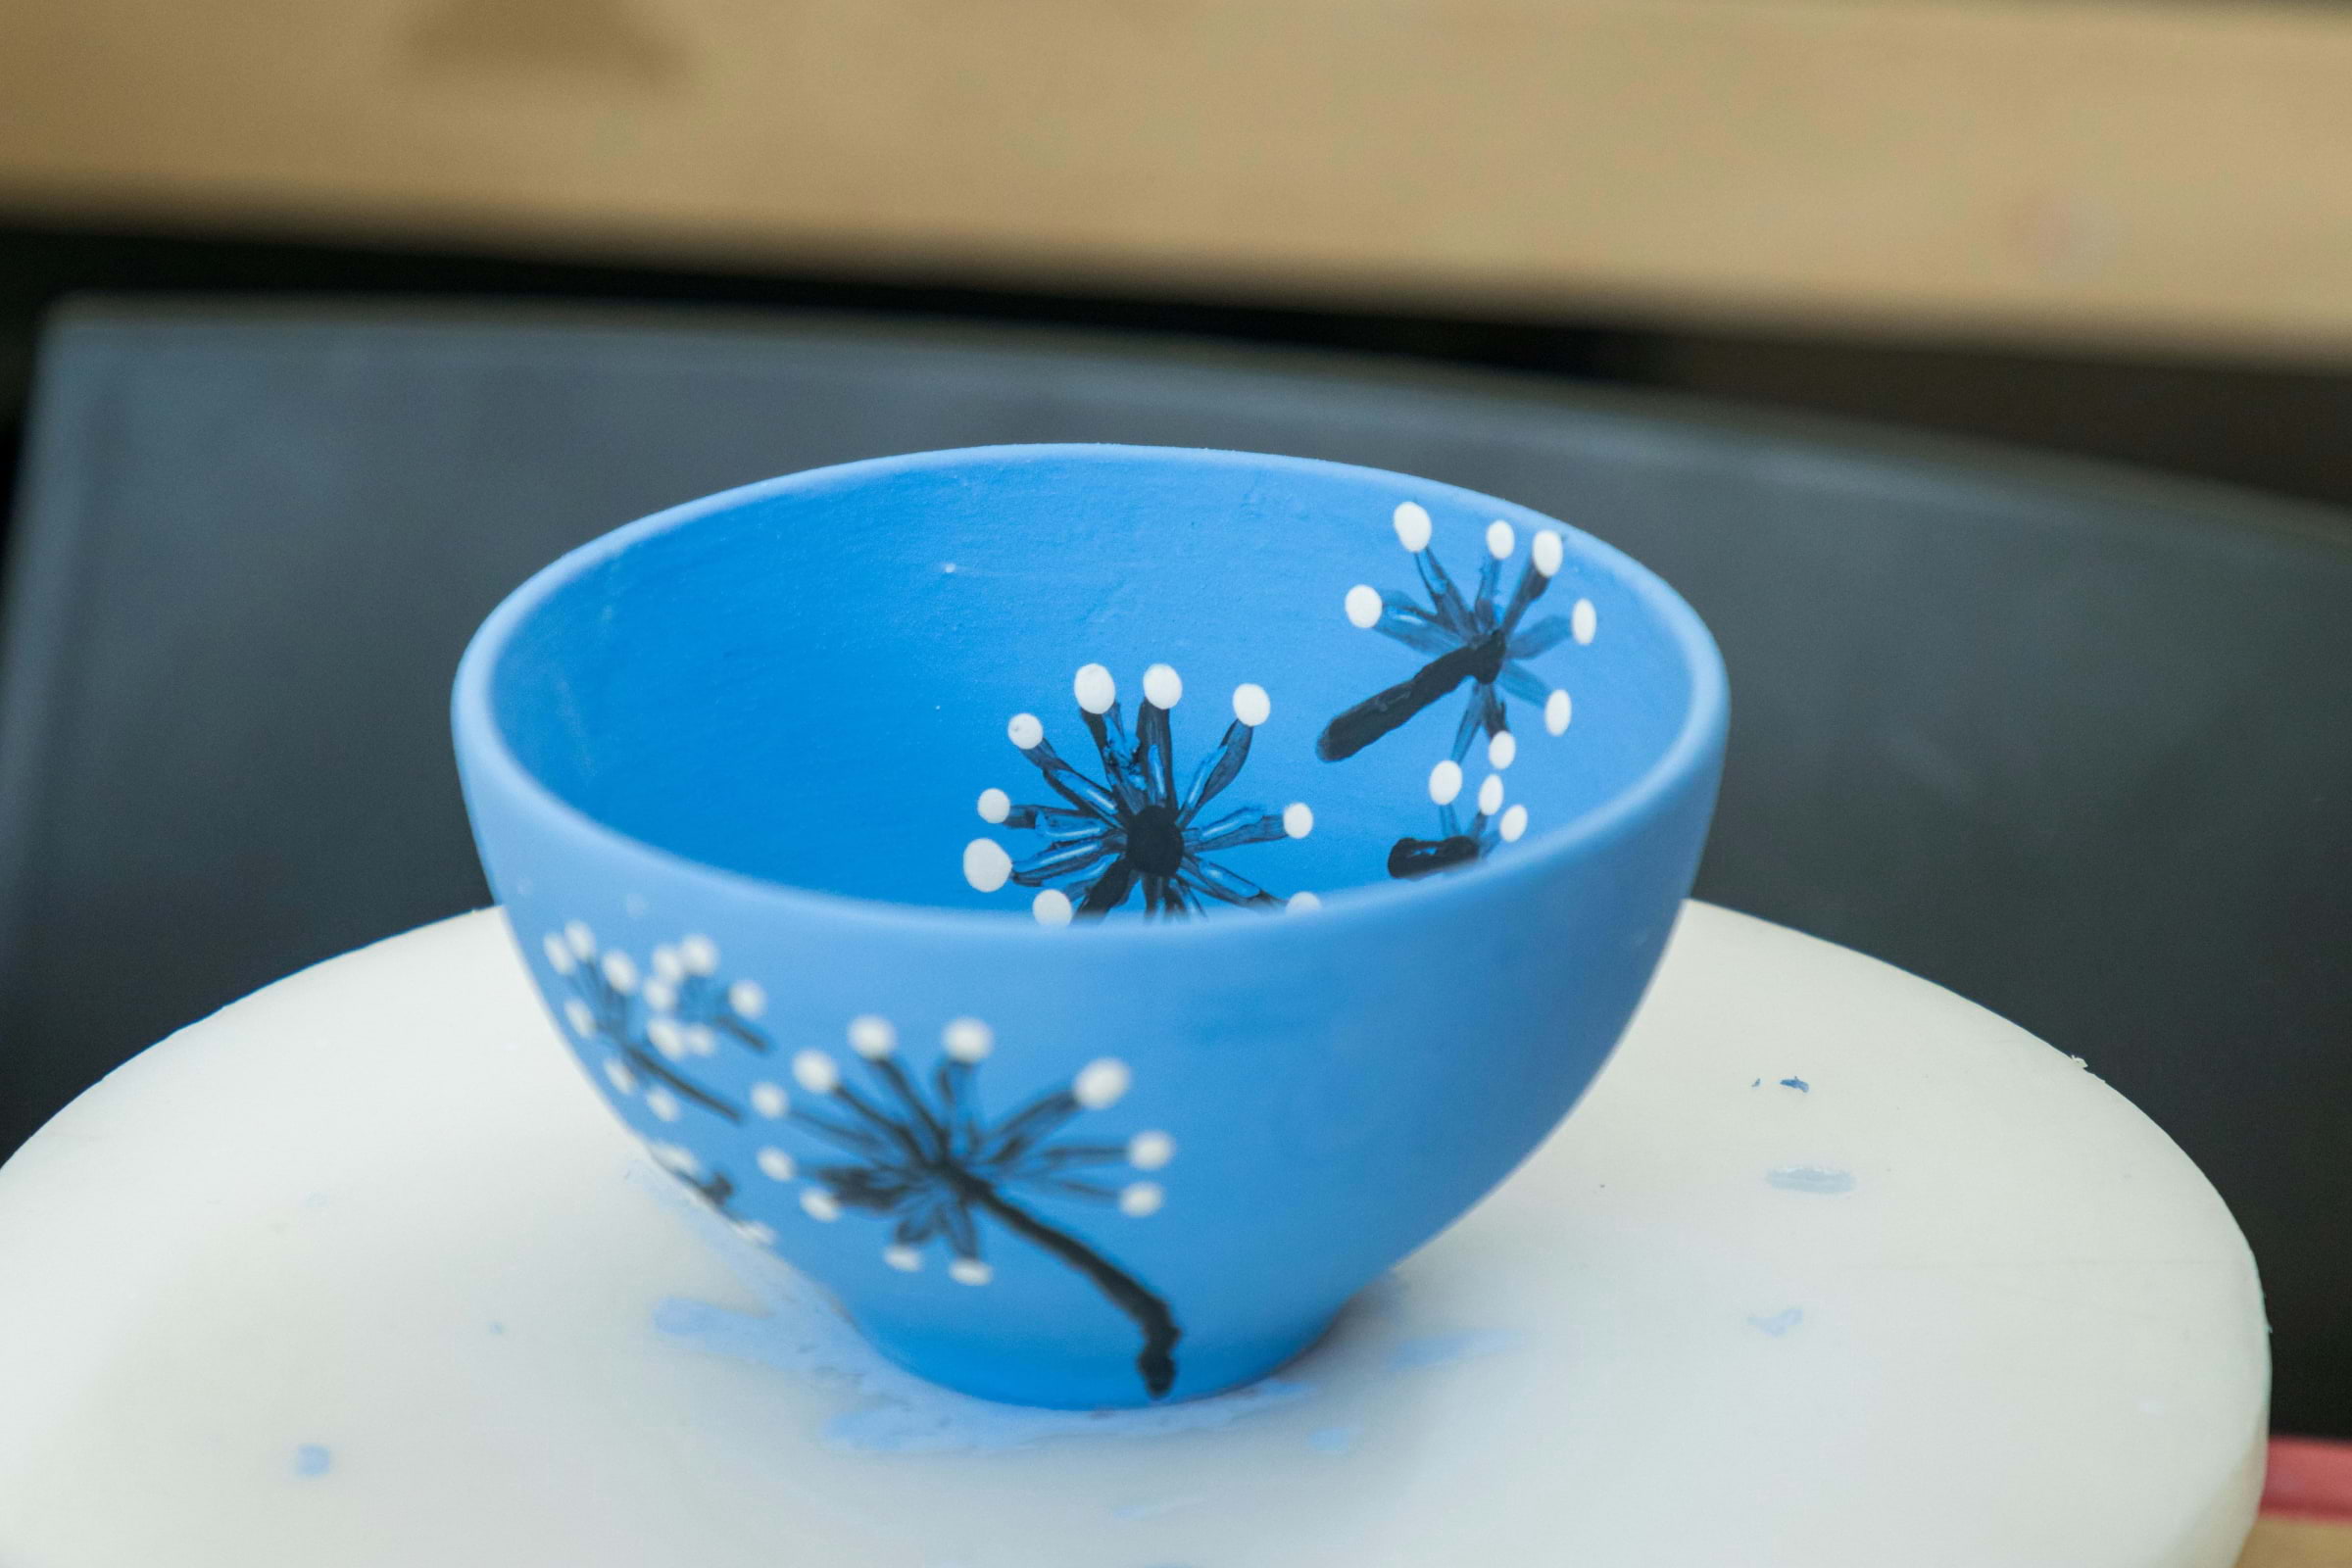 A blue ceramic bowl with dandelions painted on it